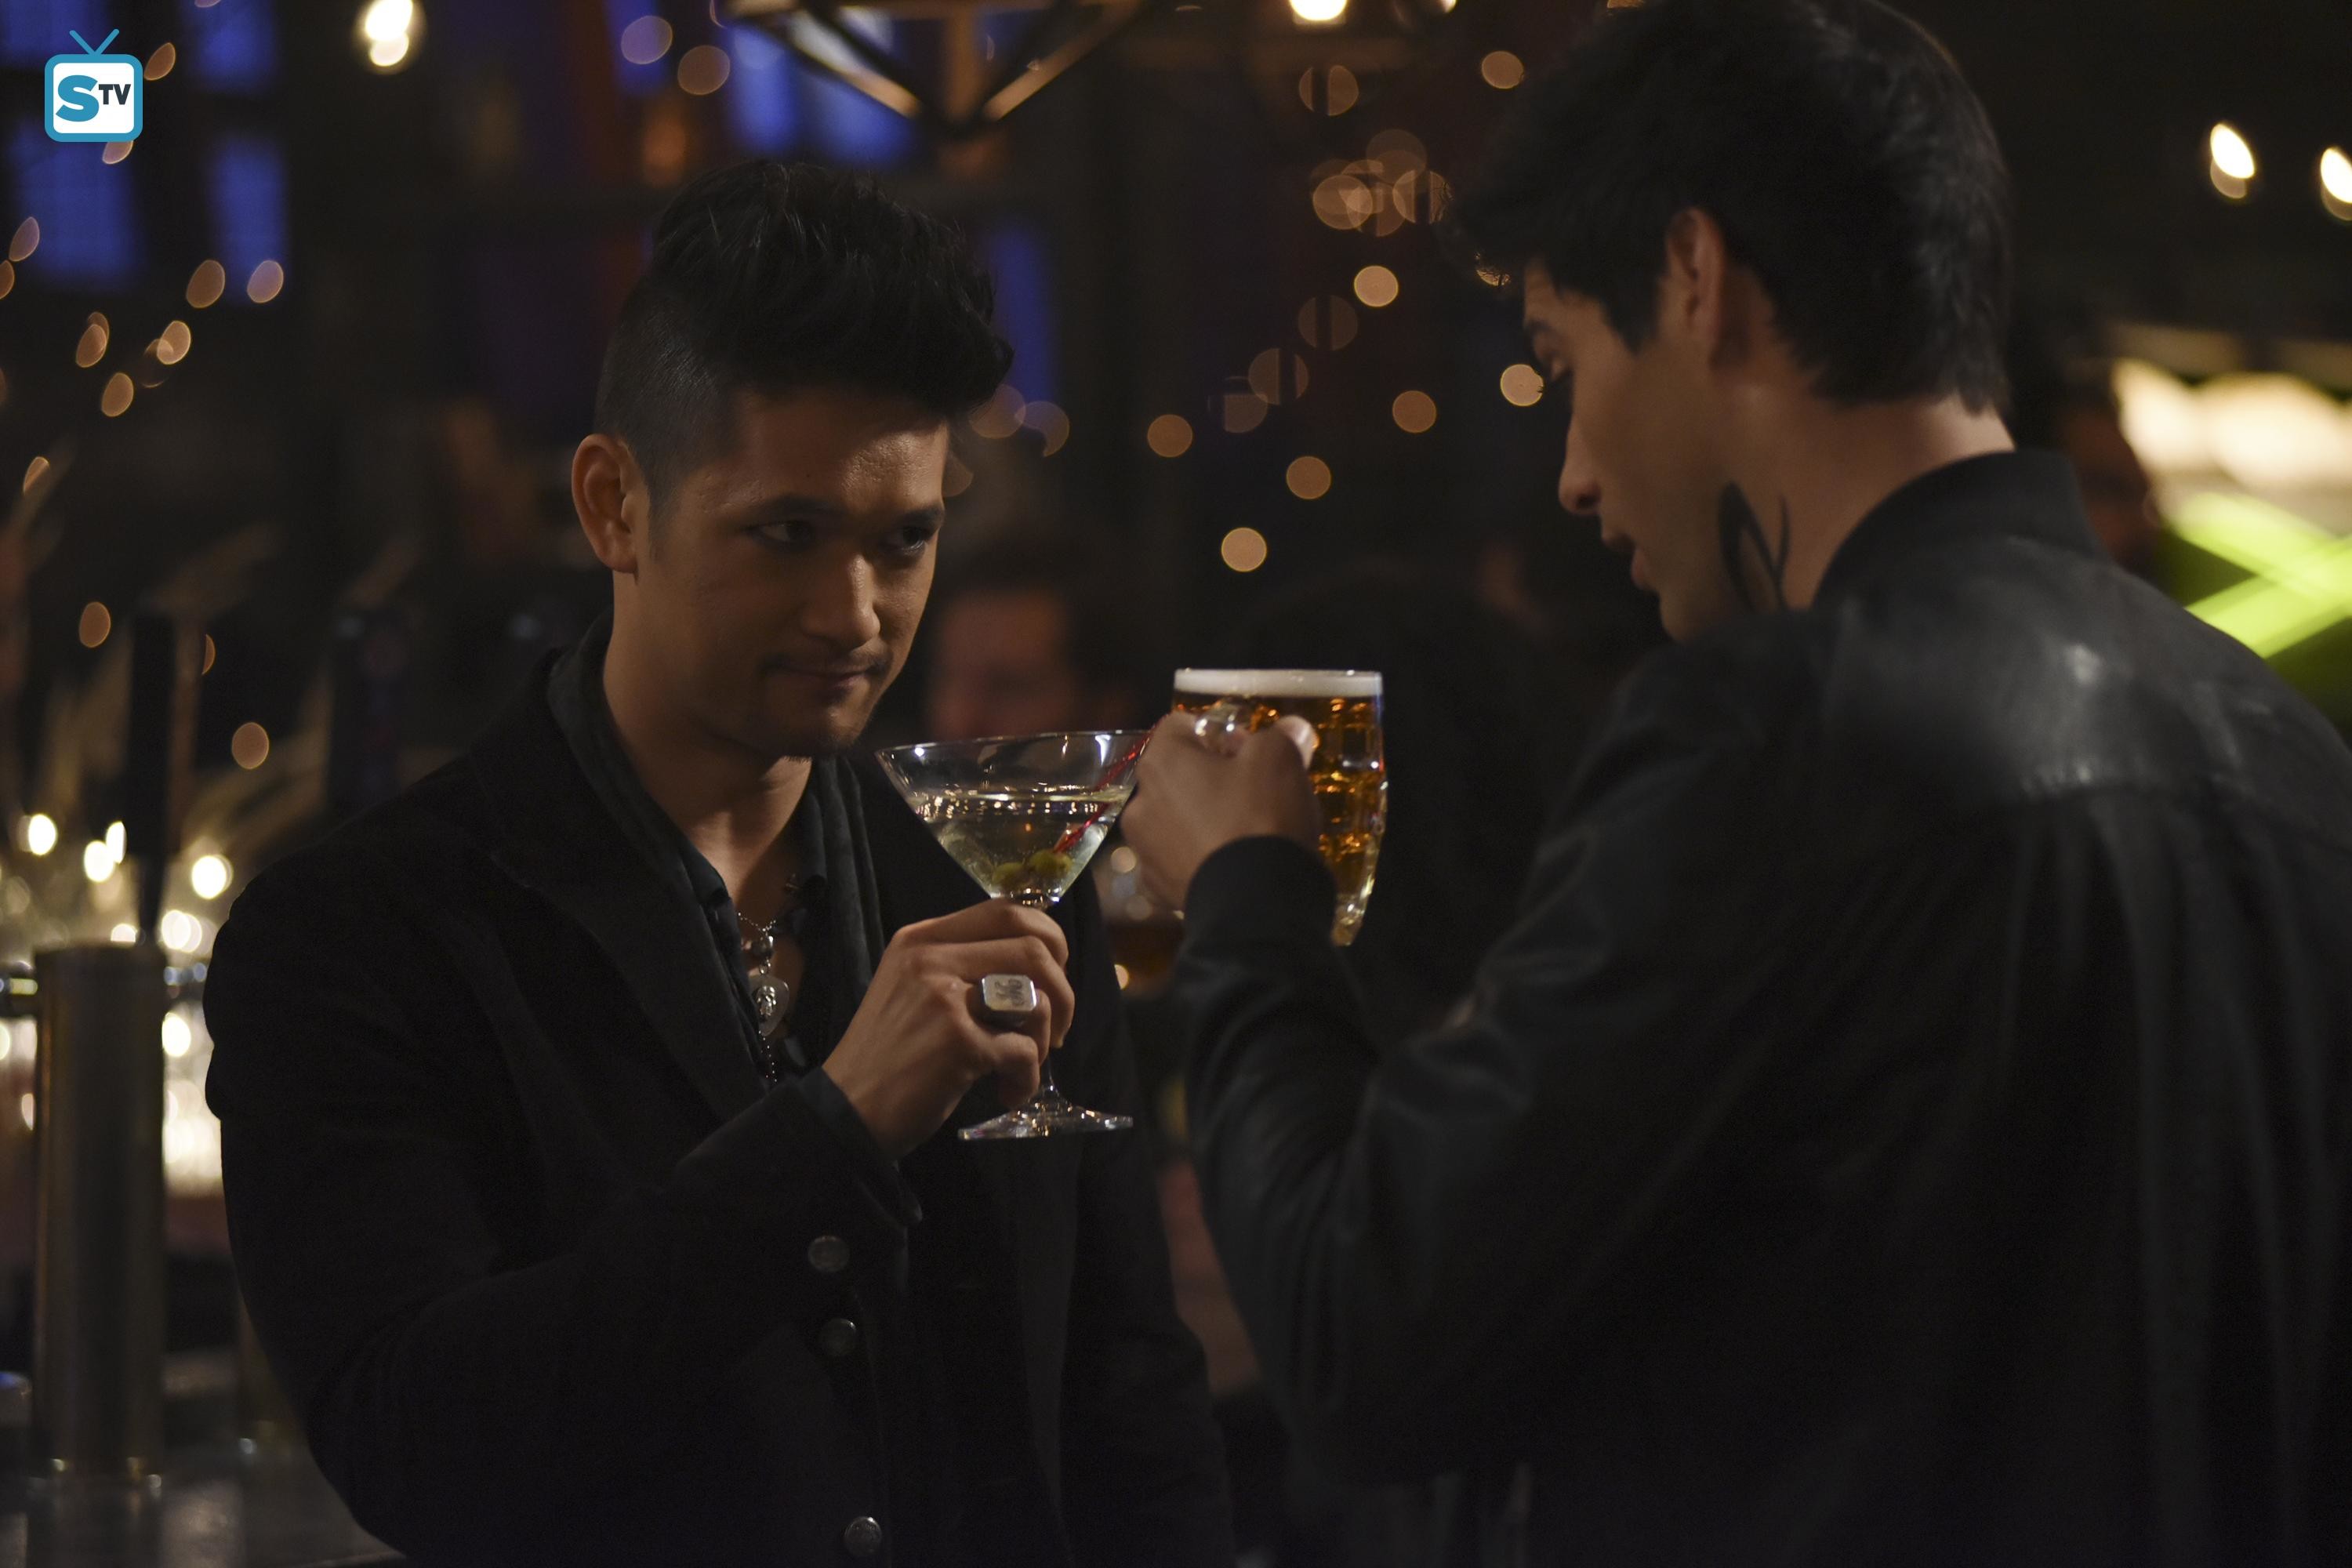 3000x2000 Alec & Magnus images Shadowhunters - Season 2 - 2x06 - Promotional Stills  HD wallpaper and background photos